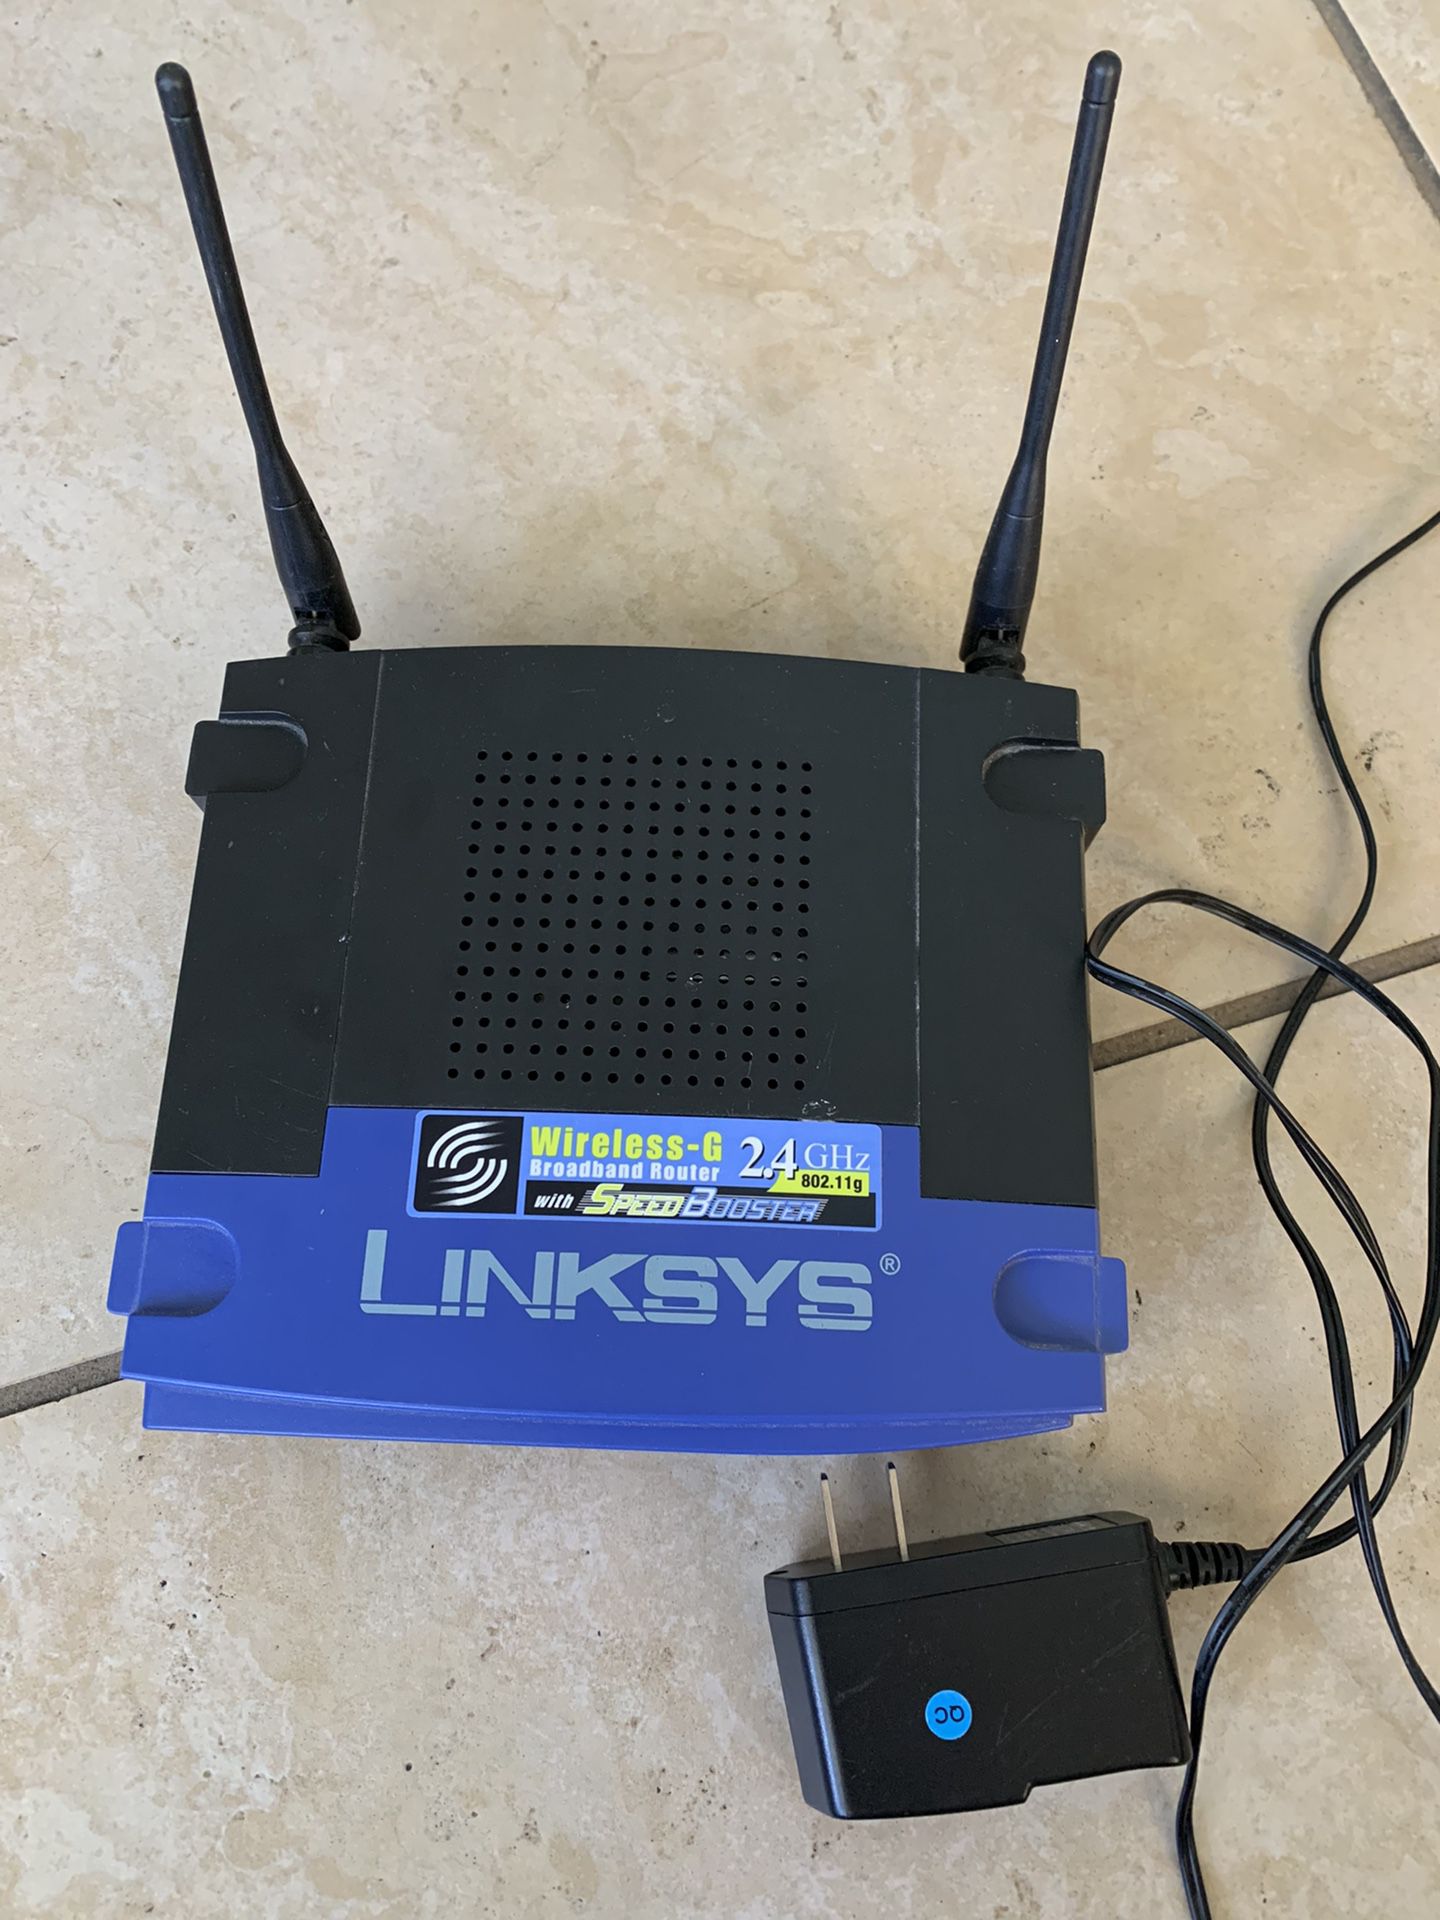 Fast Wi-Fi Router